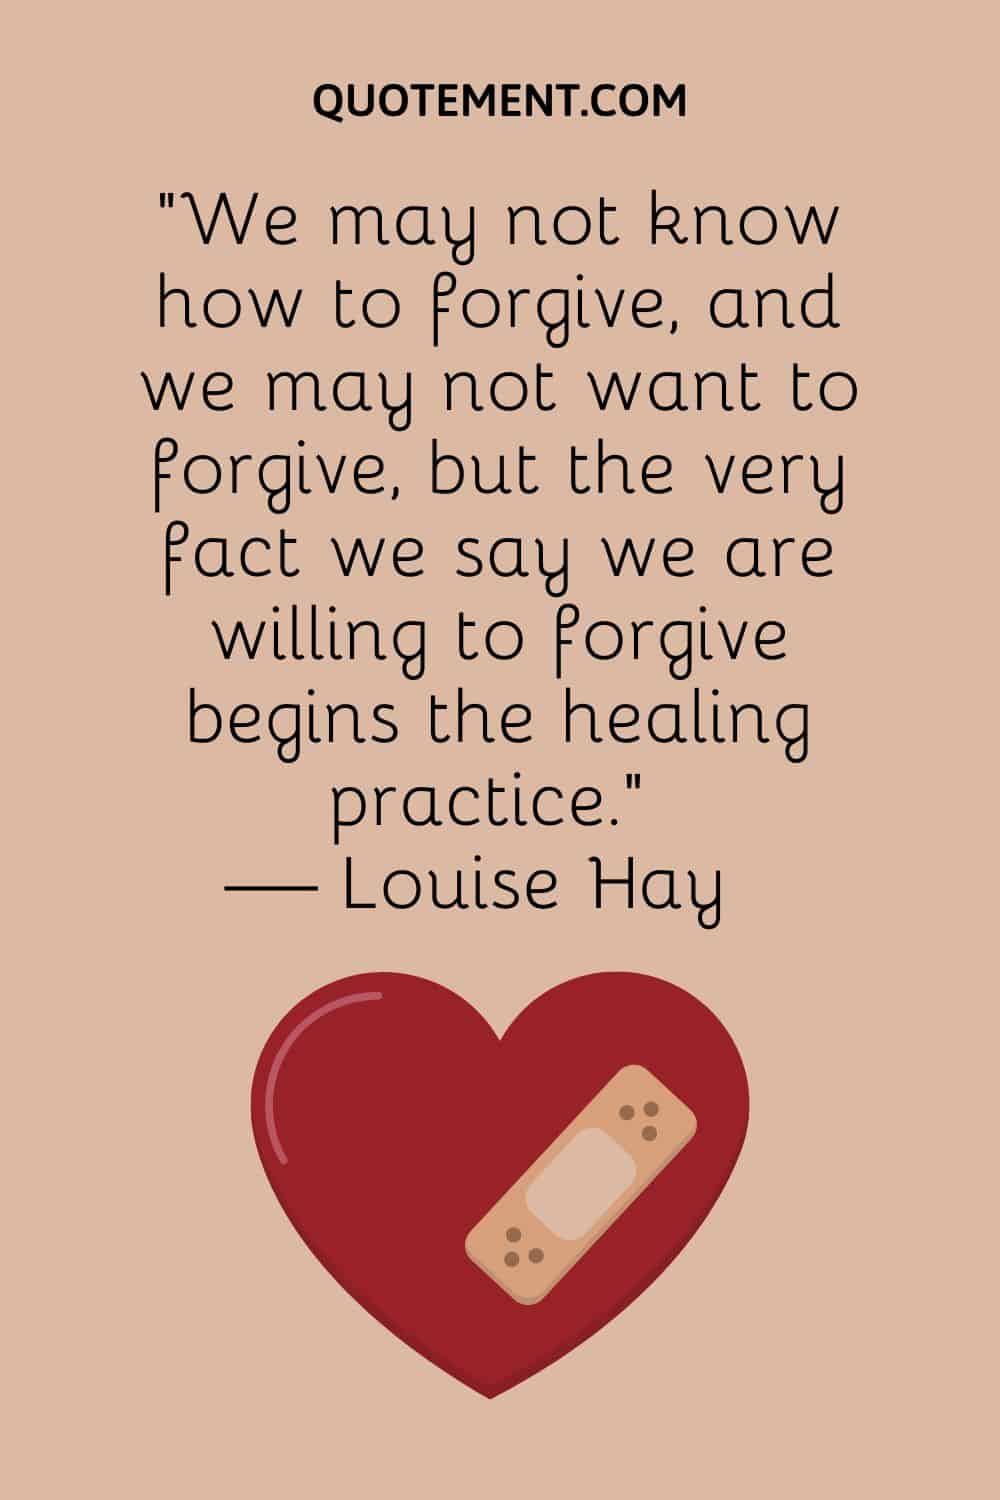 We may not know how to forgive, and we may not want to forgive